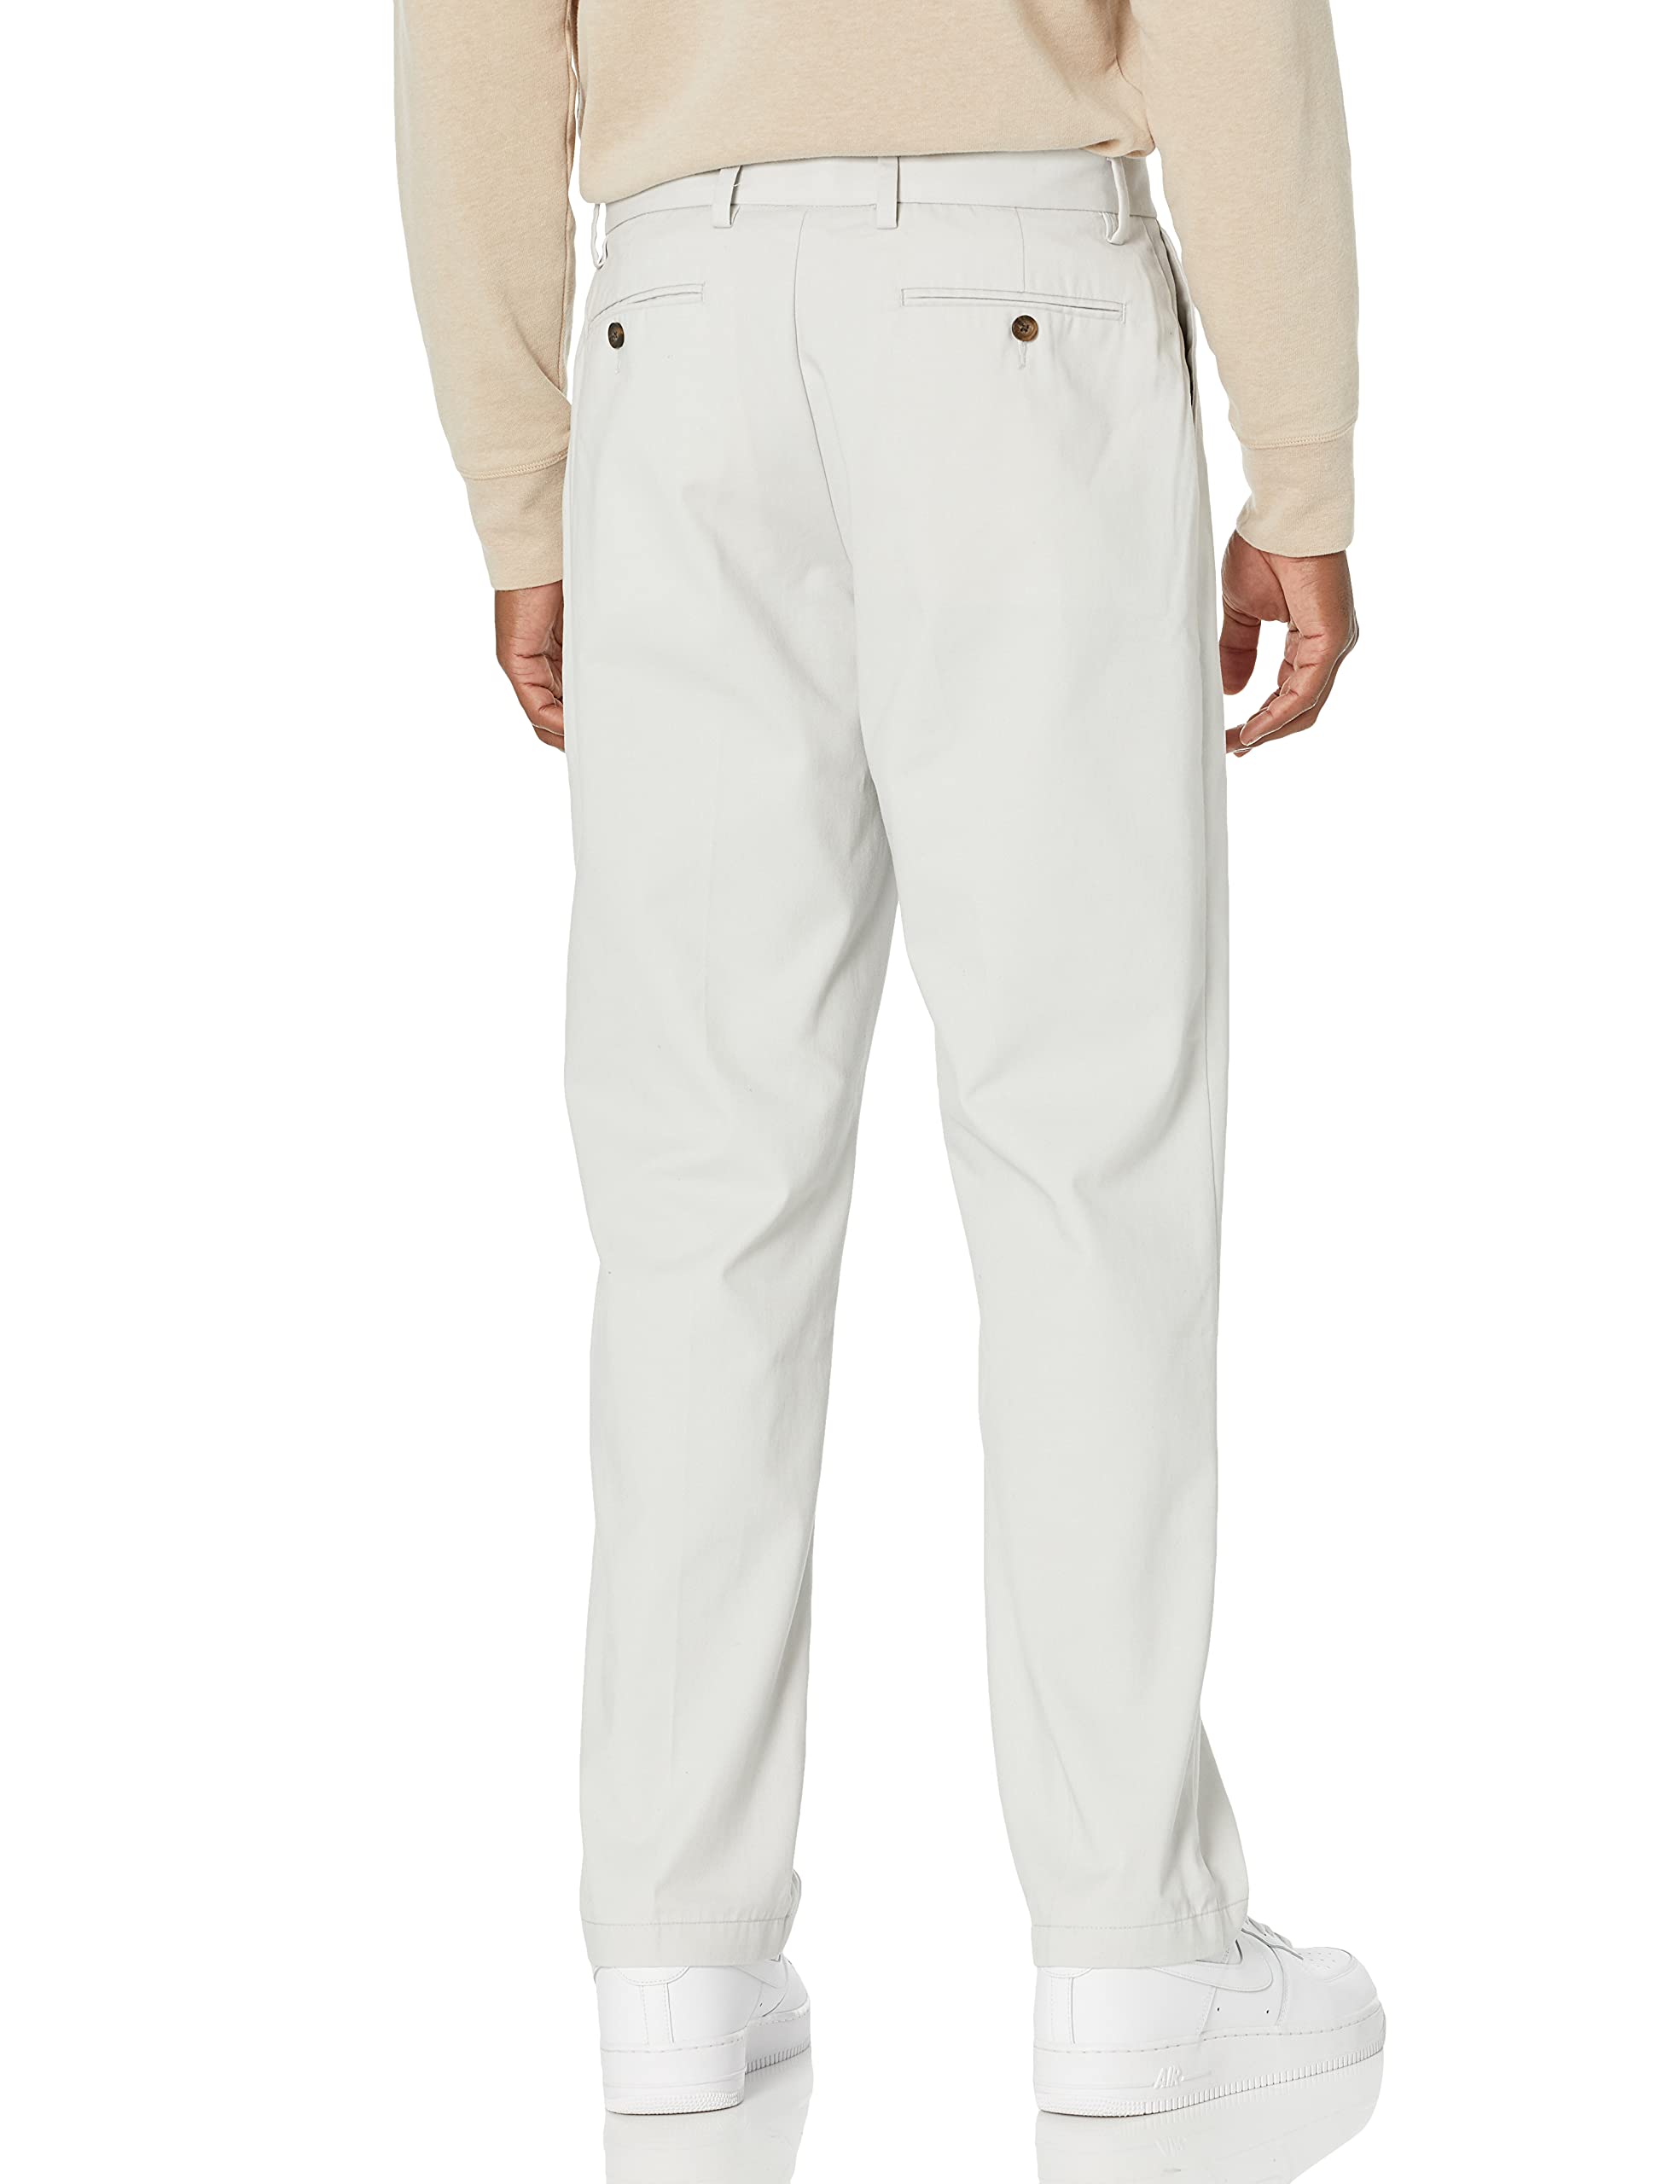 Amazon Essentials Men's Classic-Fit Wrinkle-Resistant Flat-Front Chino Pant